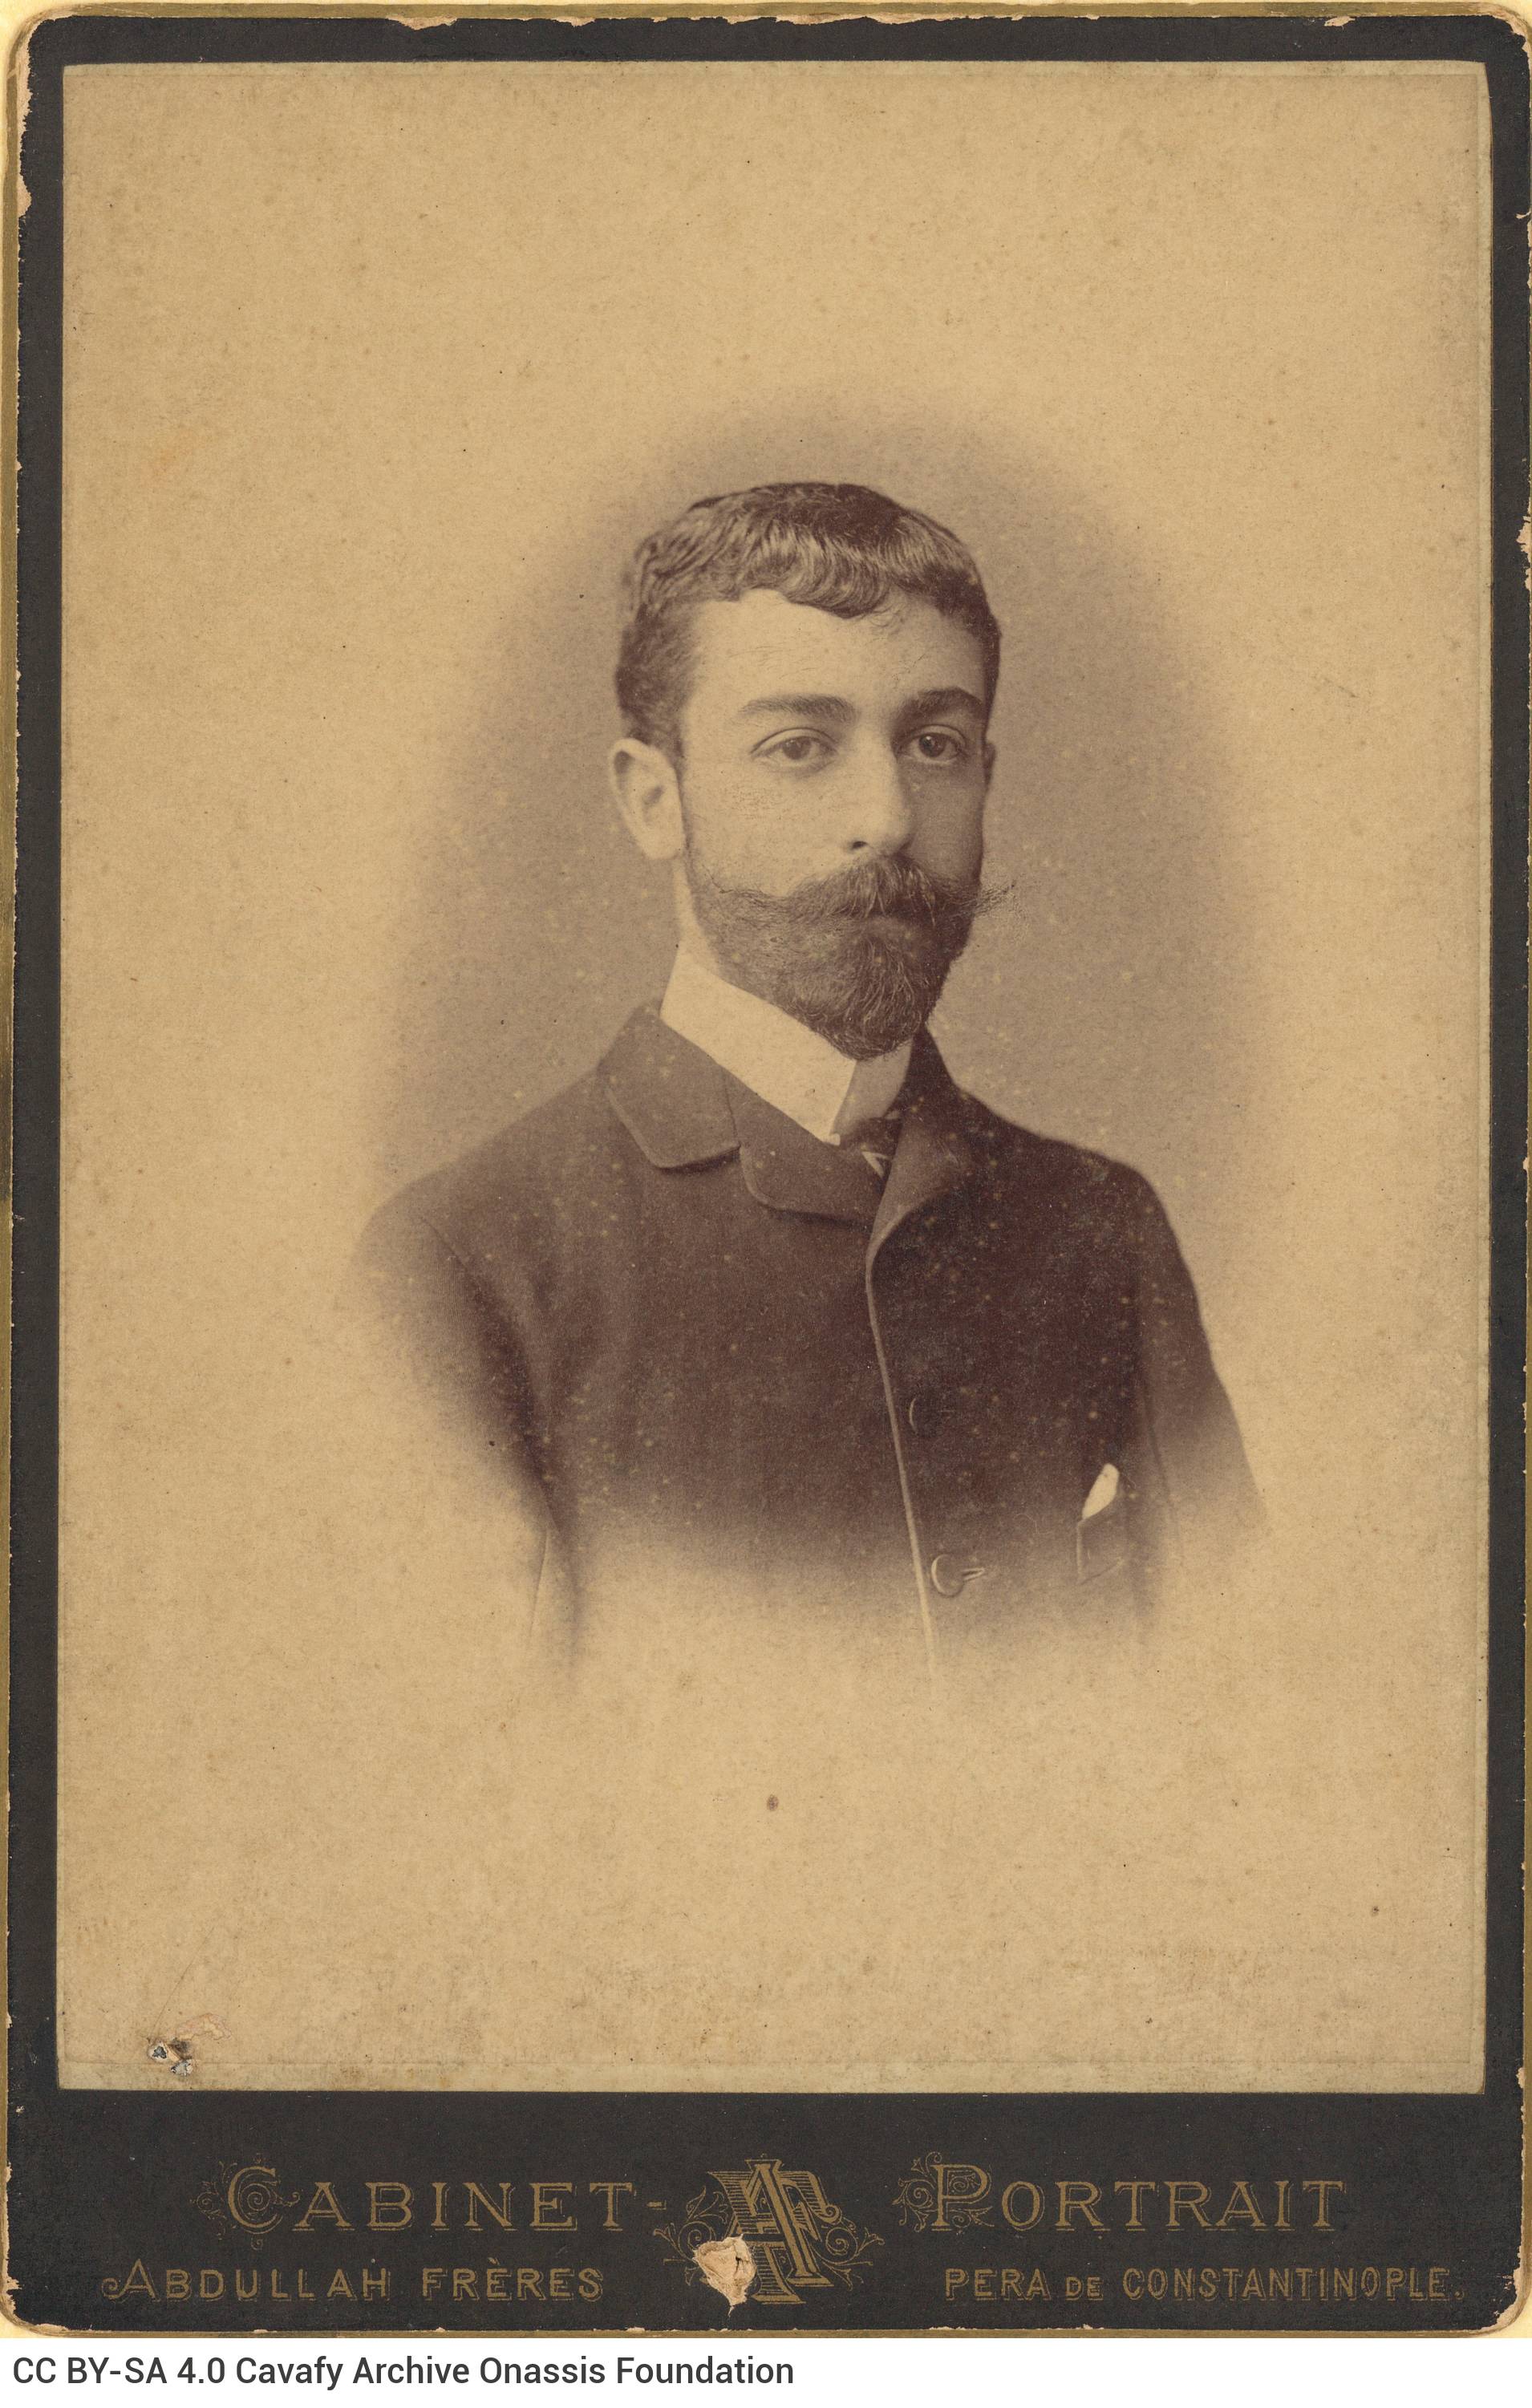 Photograph of Paul Cavafy at a young age in Istanbul (1882-1885), with a moustache and beard. The logo of the photo shop in t